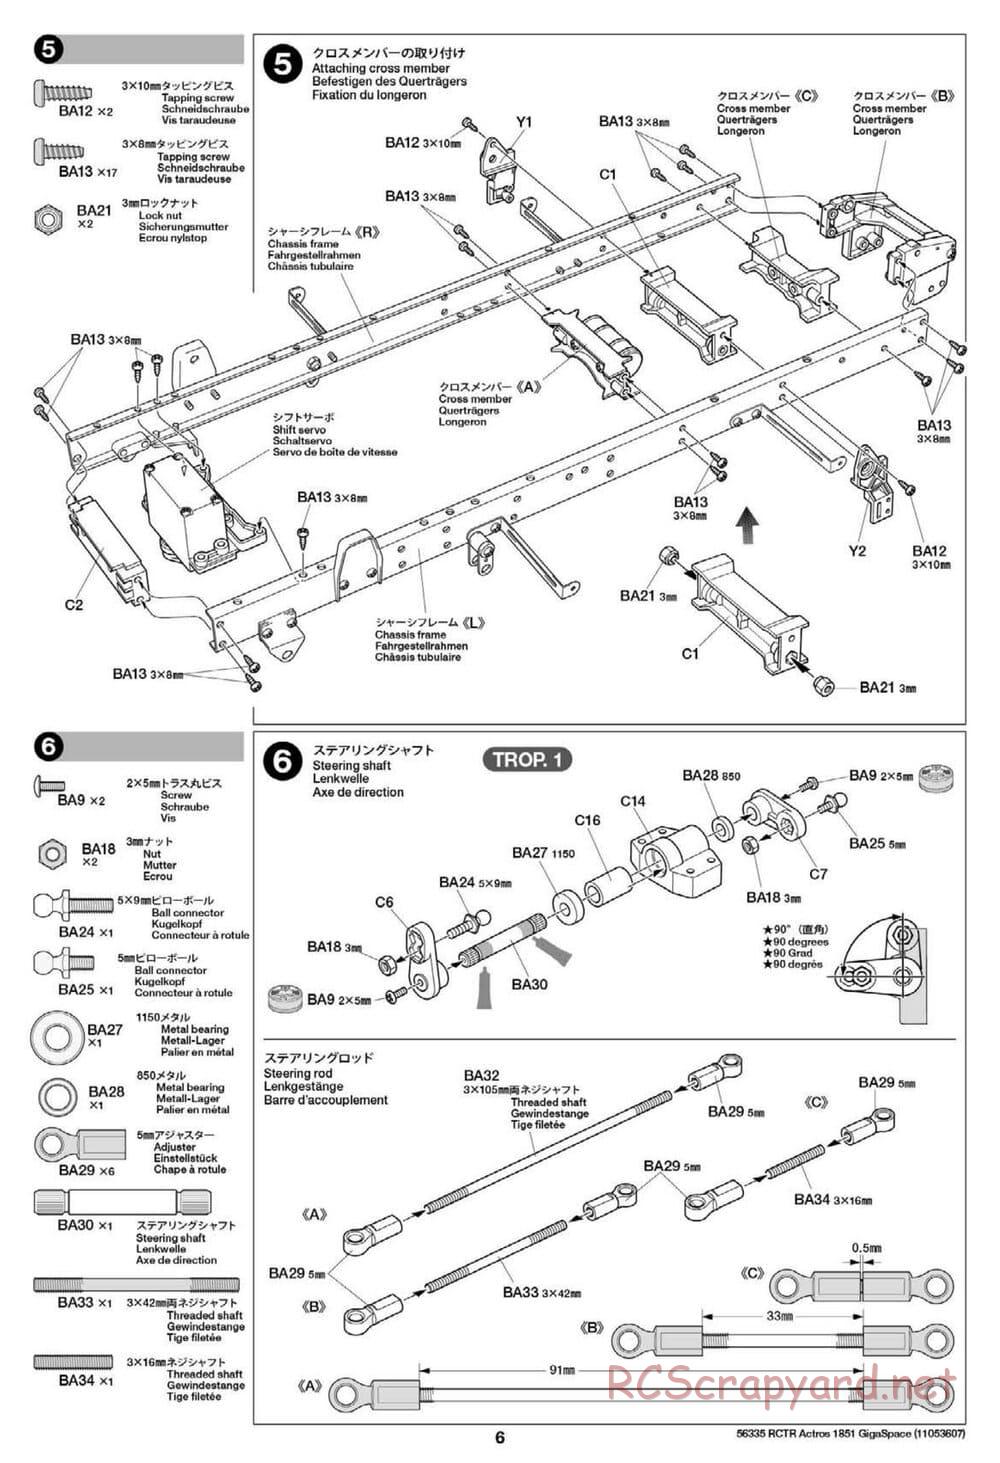 Tamiya - Mercedes-Benz Actros 1851 Gigaspace Tractor Truck Chassis - Manual - Page 6